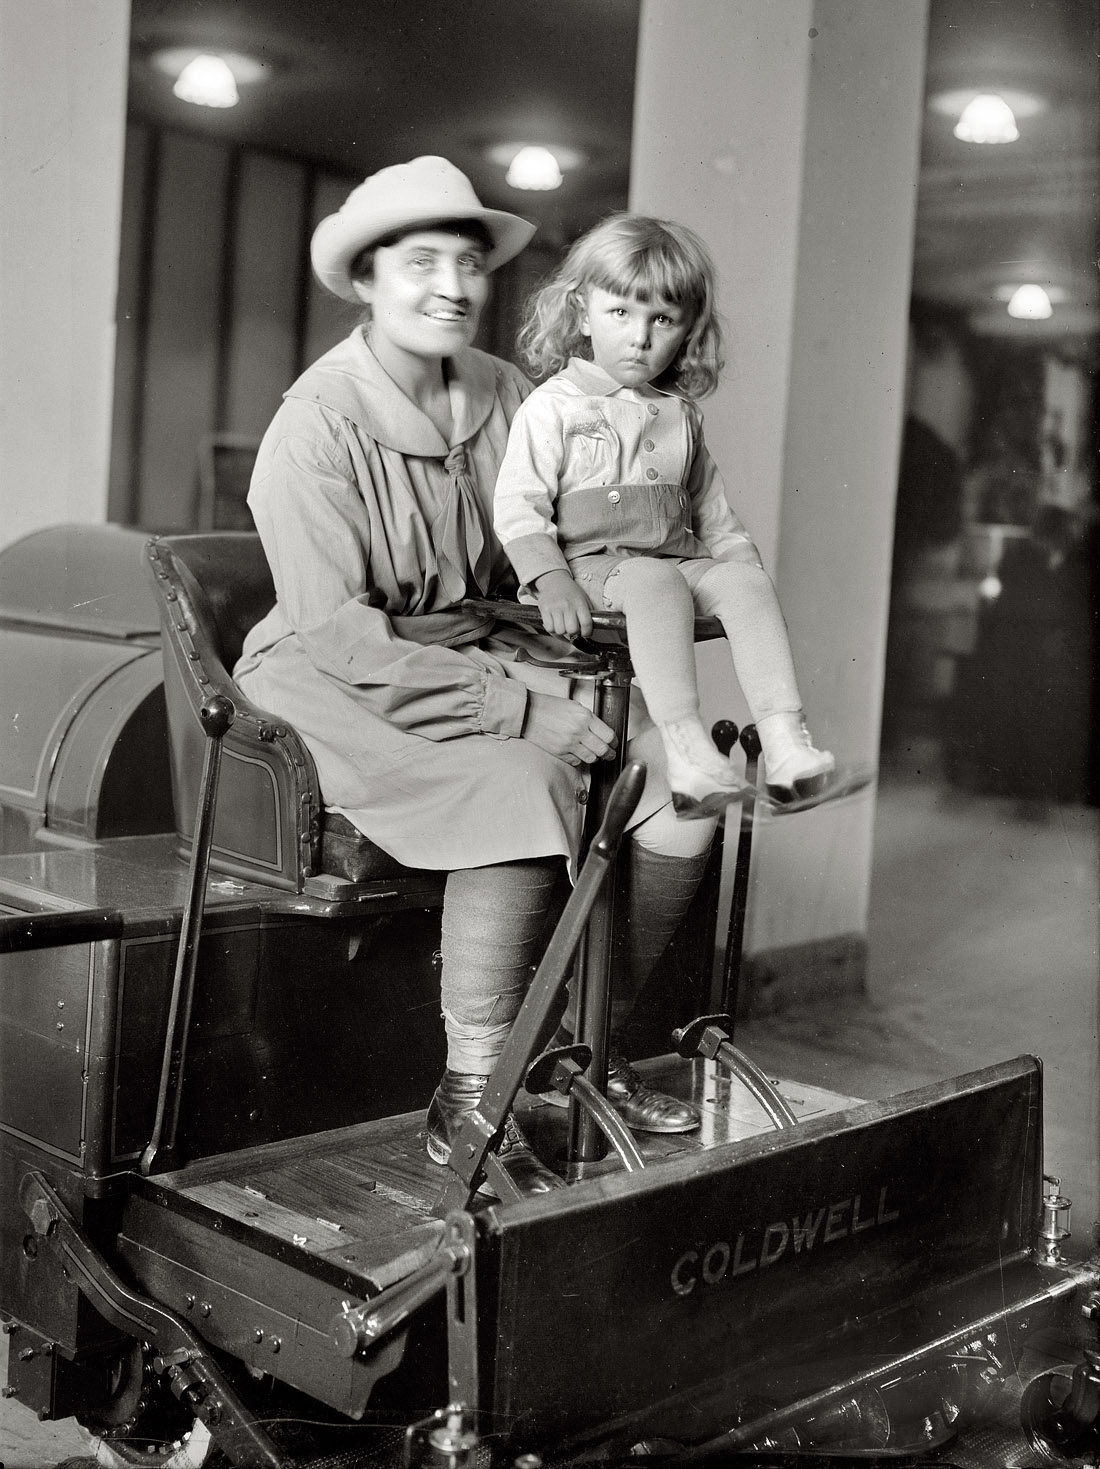 New York. March 16, 1918. "Florence A. Young and Chas. P. Rigo." 5x7 glass negative, George Grantham Bain Collection. View full size.